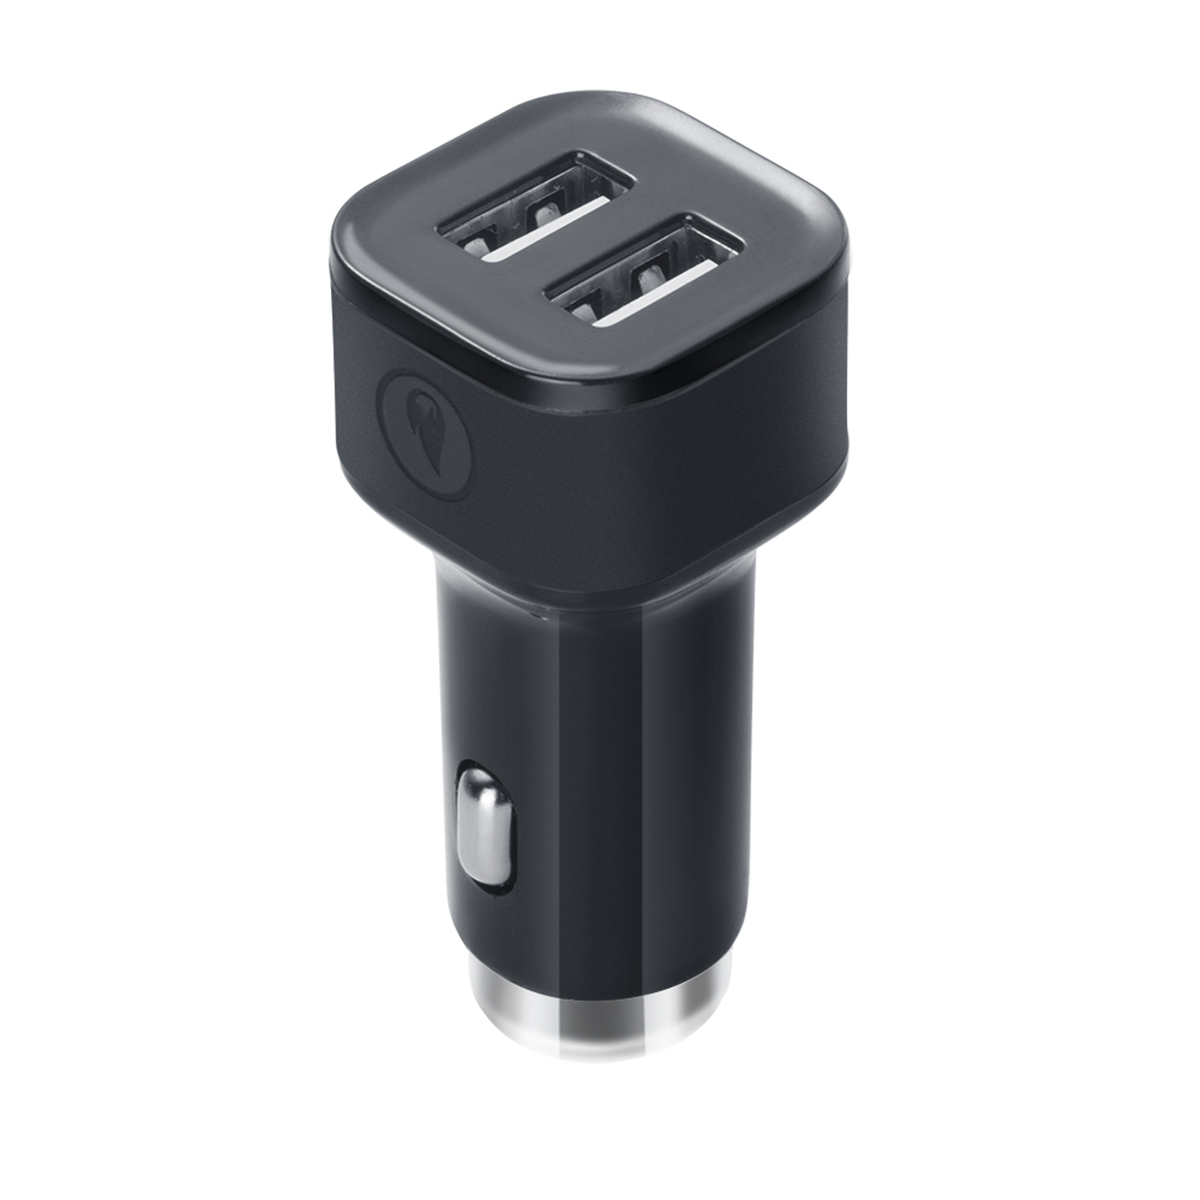 

15W 5V 3.1A Dual USB Car Charger 2 in 1 Adapter Cigarette Lighter Power Socket